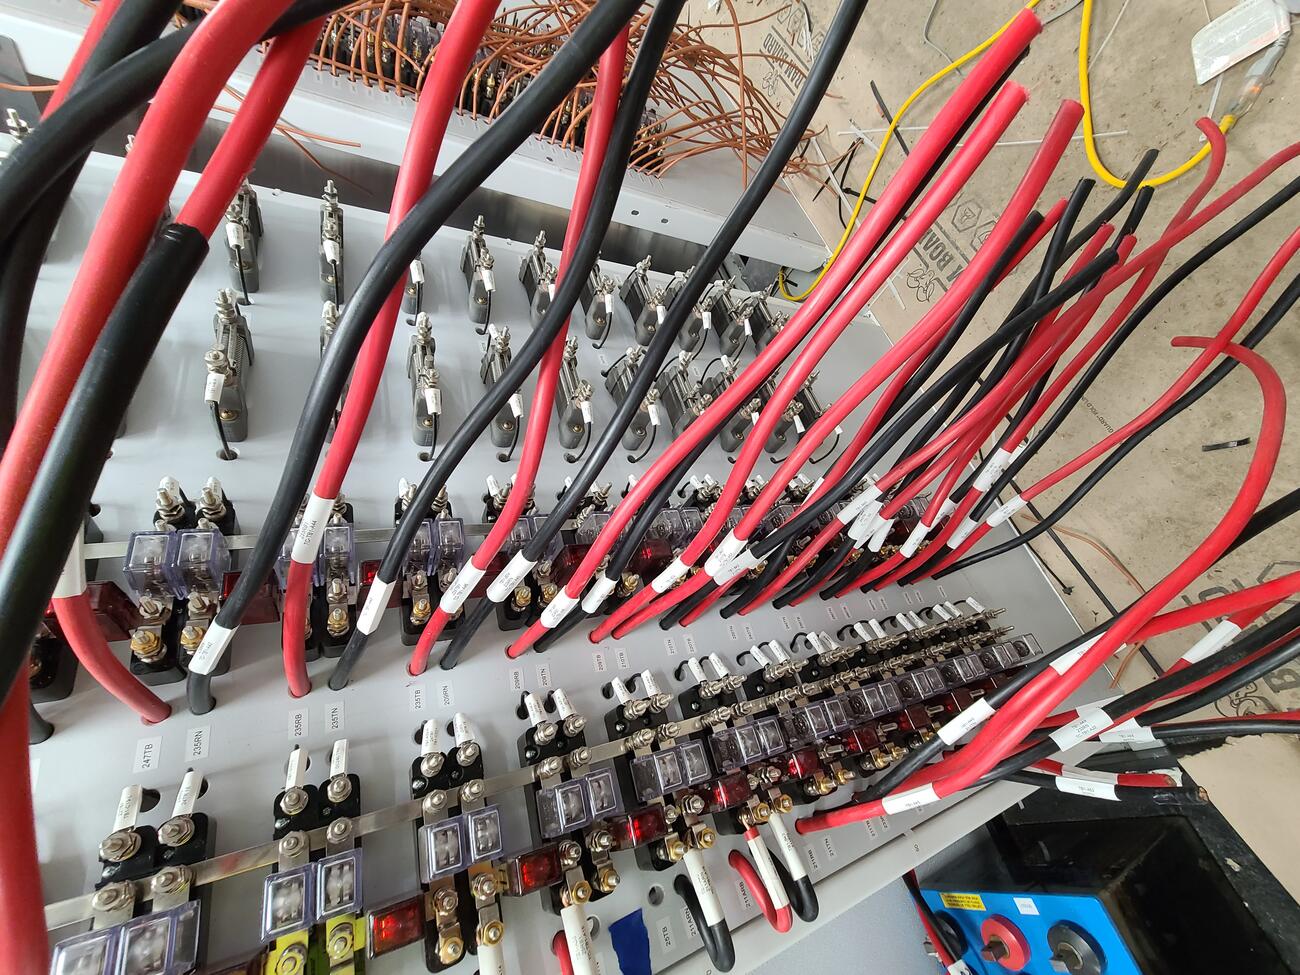 Red and black cables stick out of a grey metal wall full of circuitry during the installation of track circuits inside a signal house at North Station.